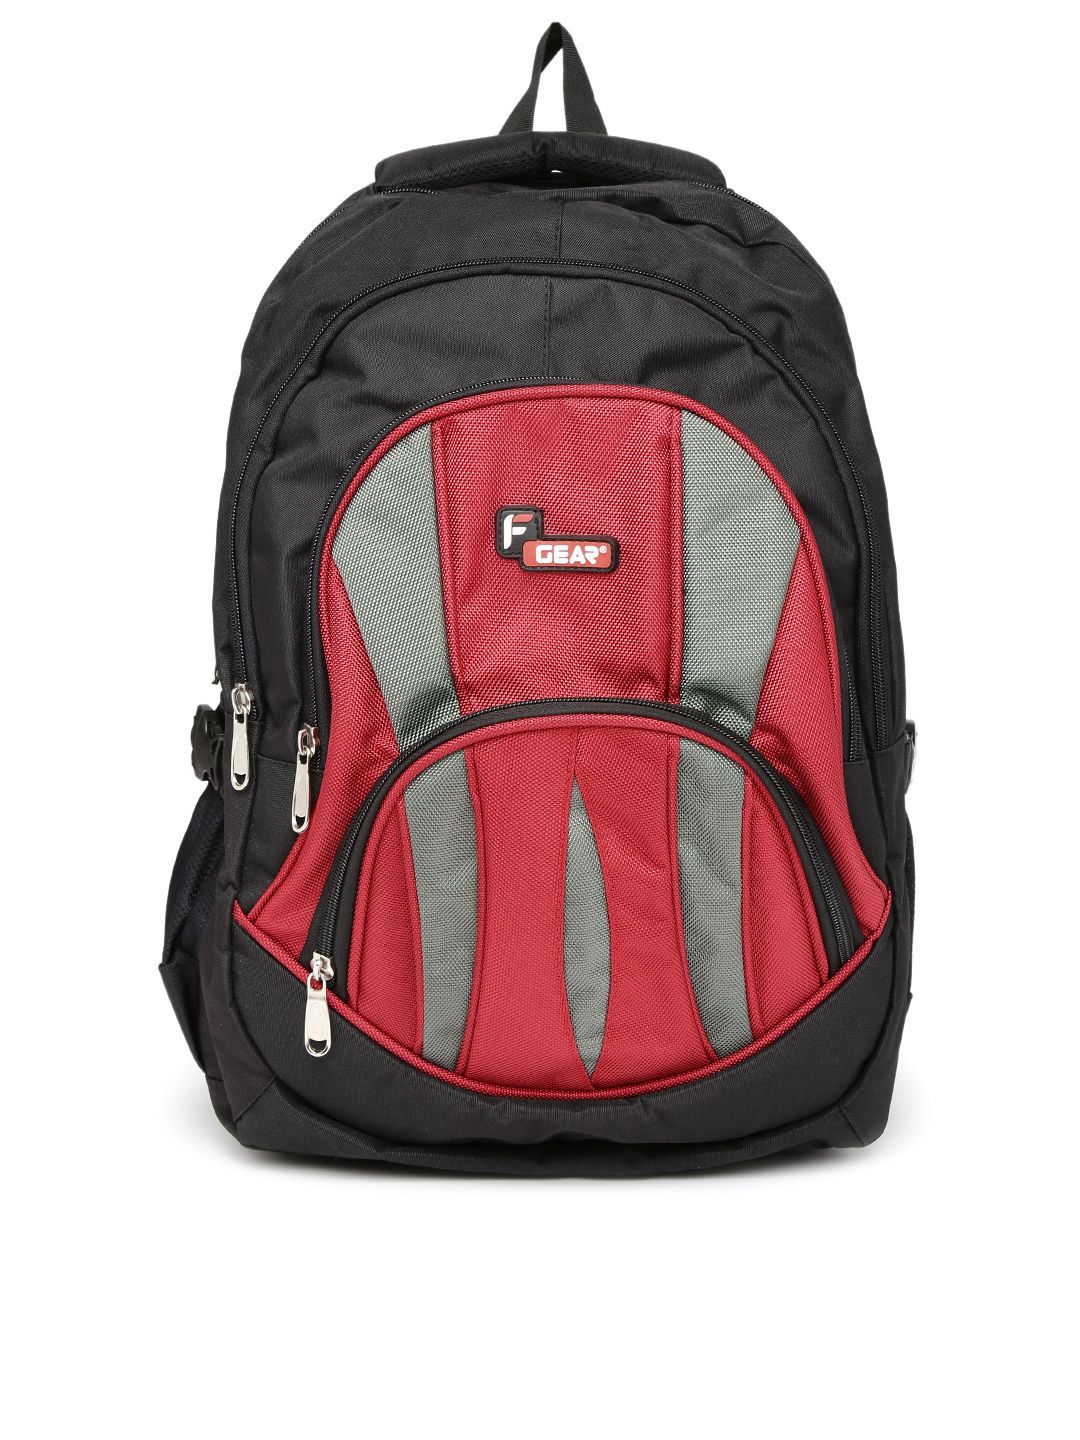 F Gear Unisex Black & Red Adios Backpack Price in India